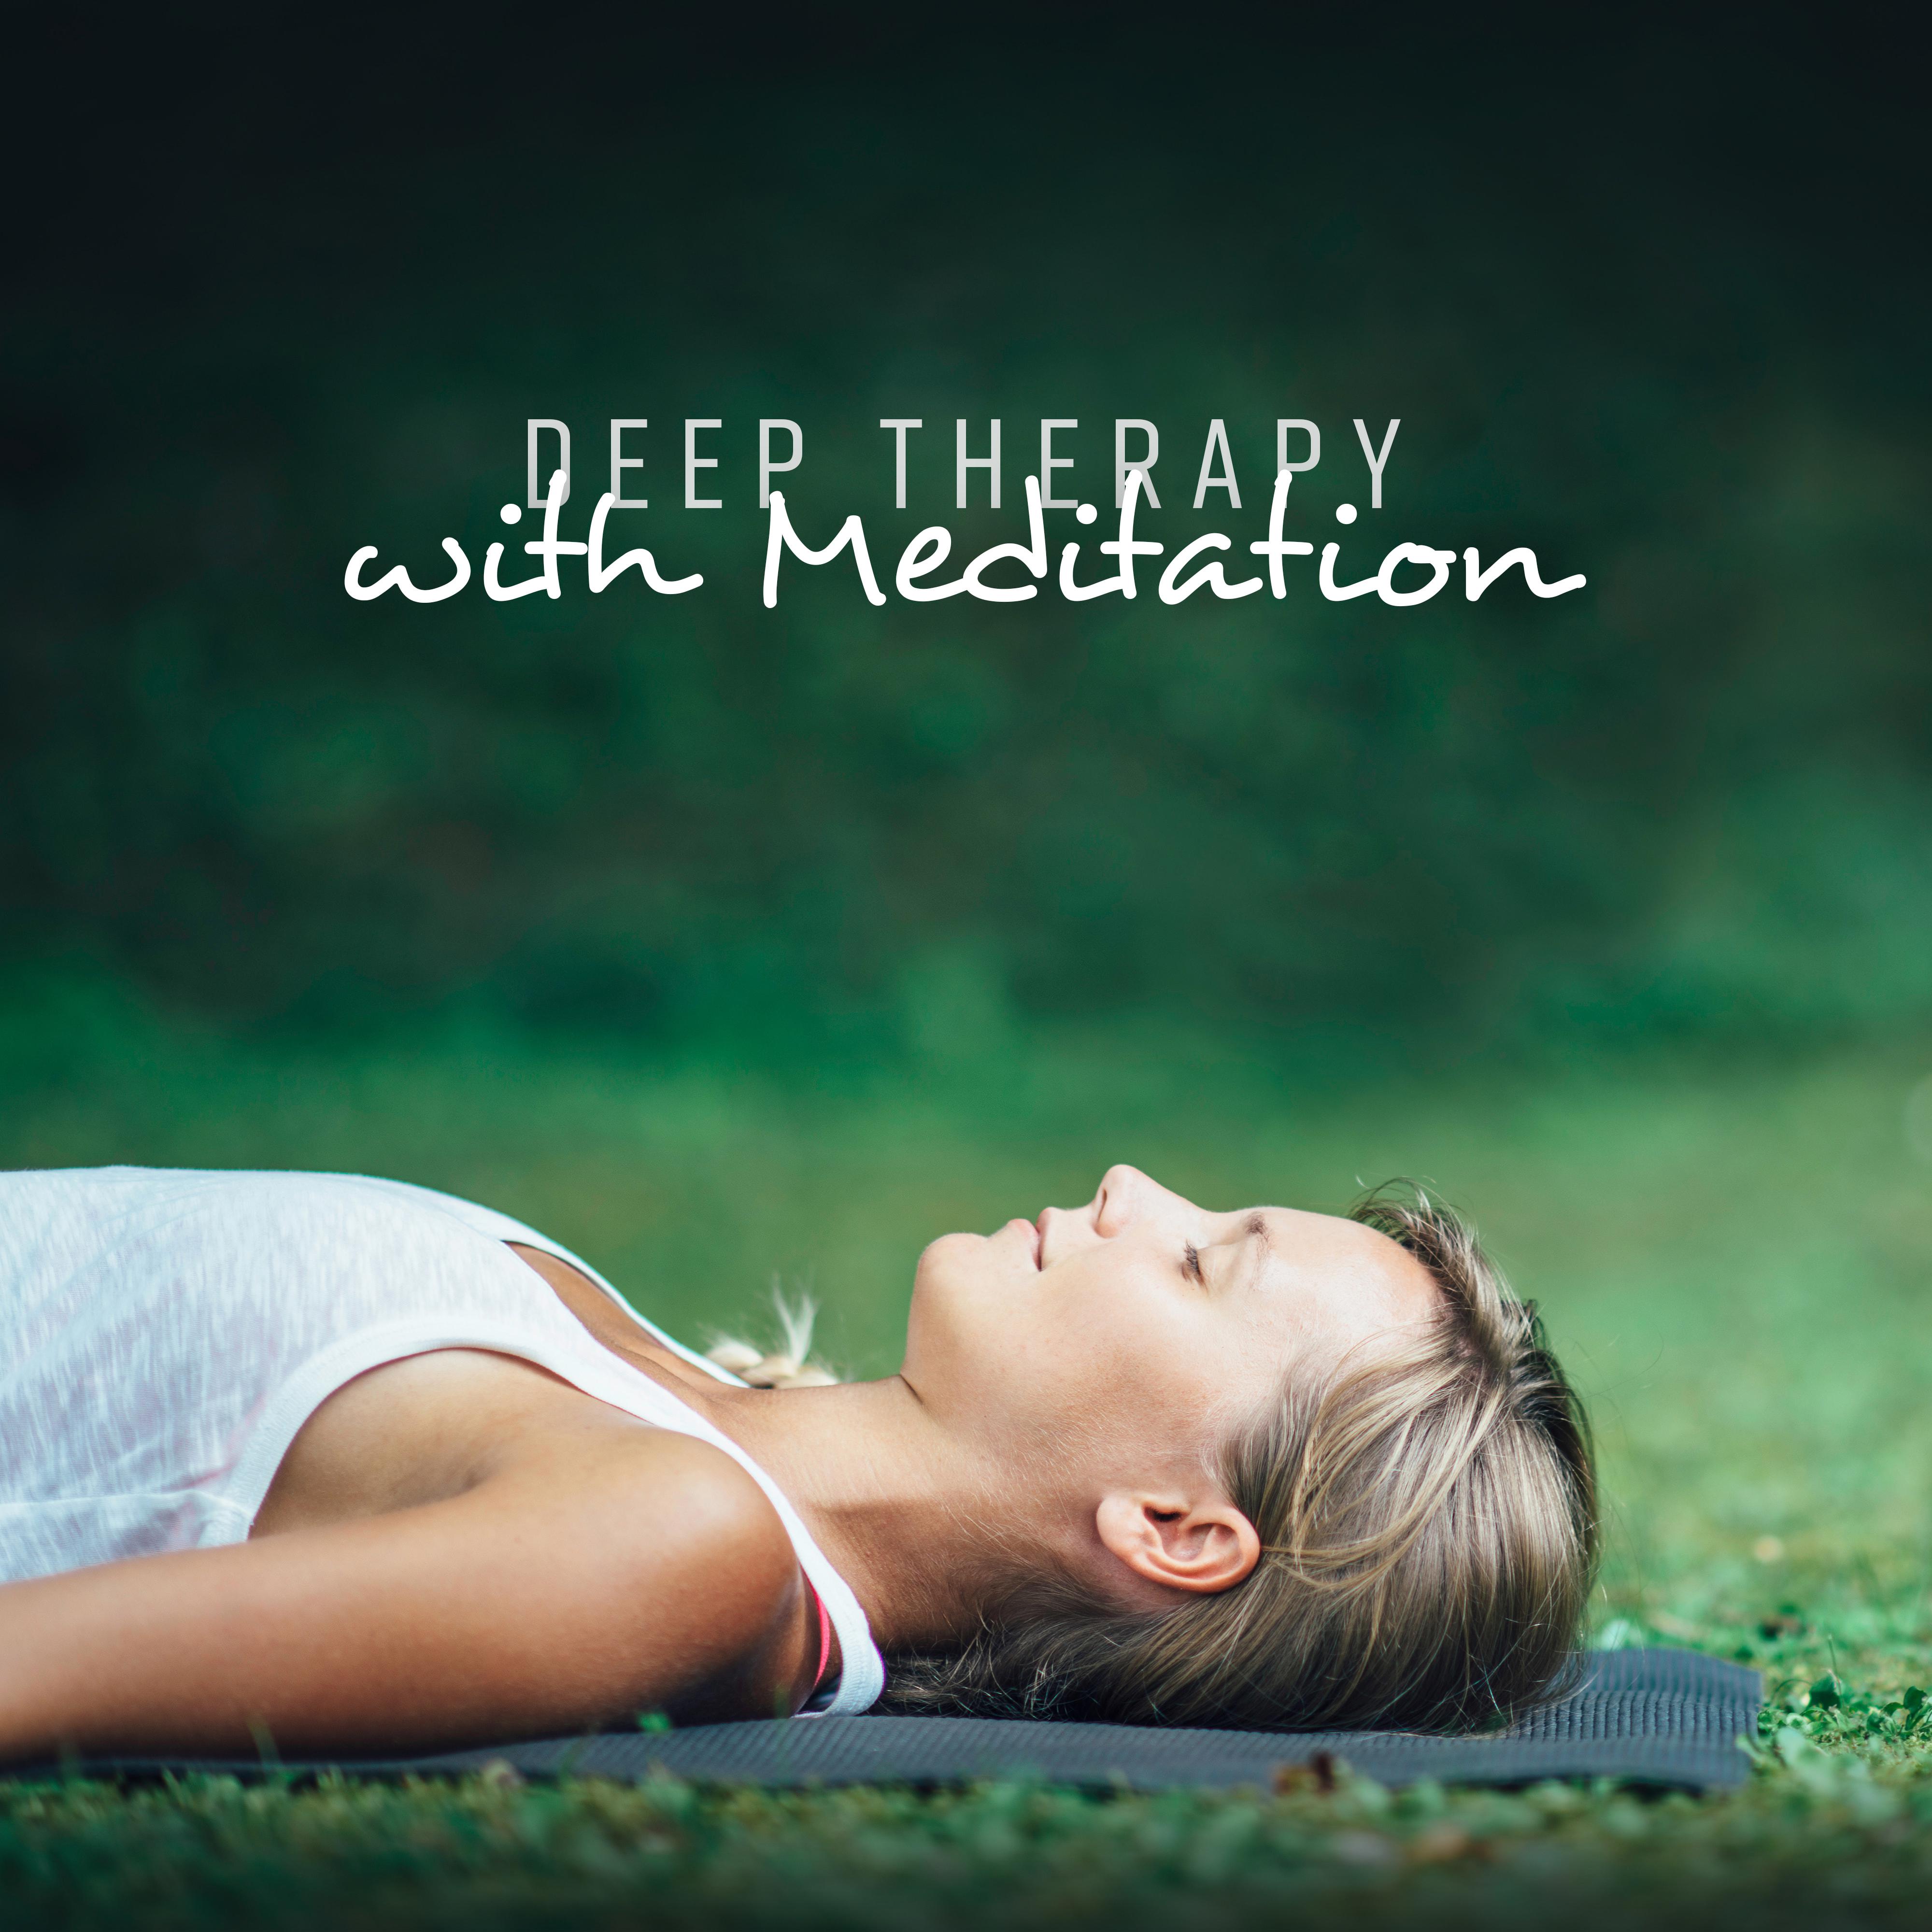 Deep Therapy with Meditation